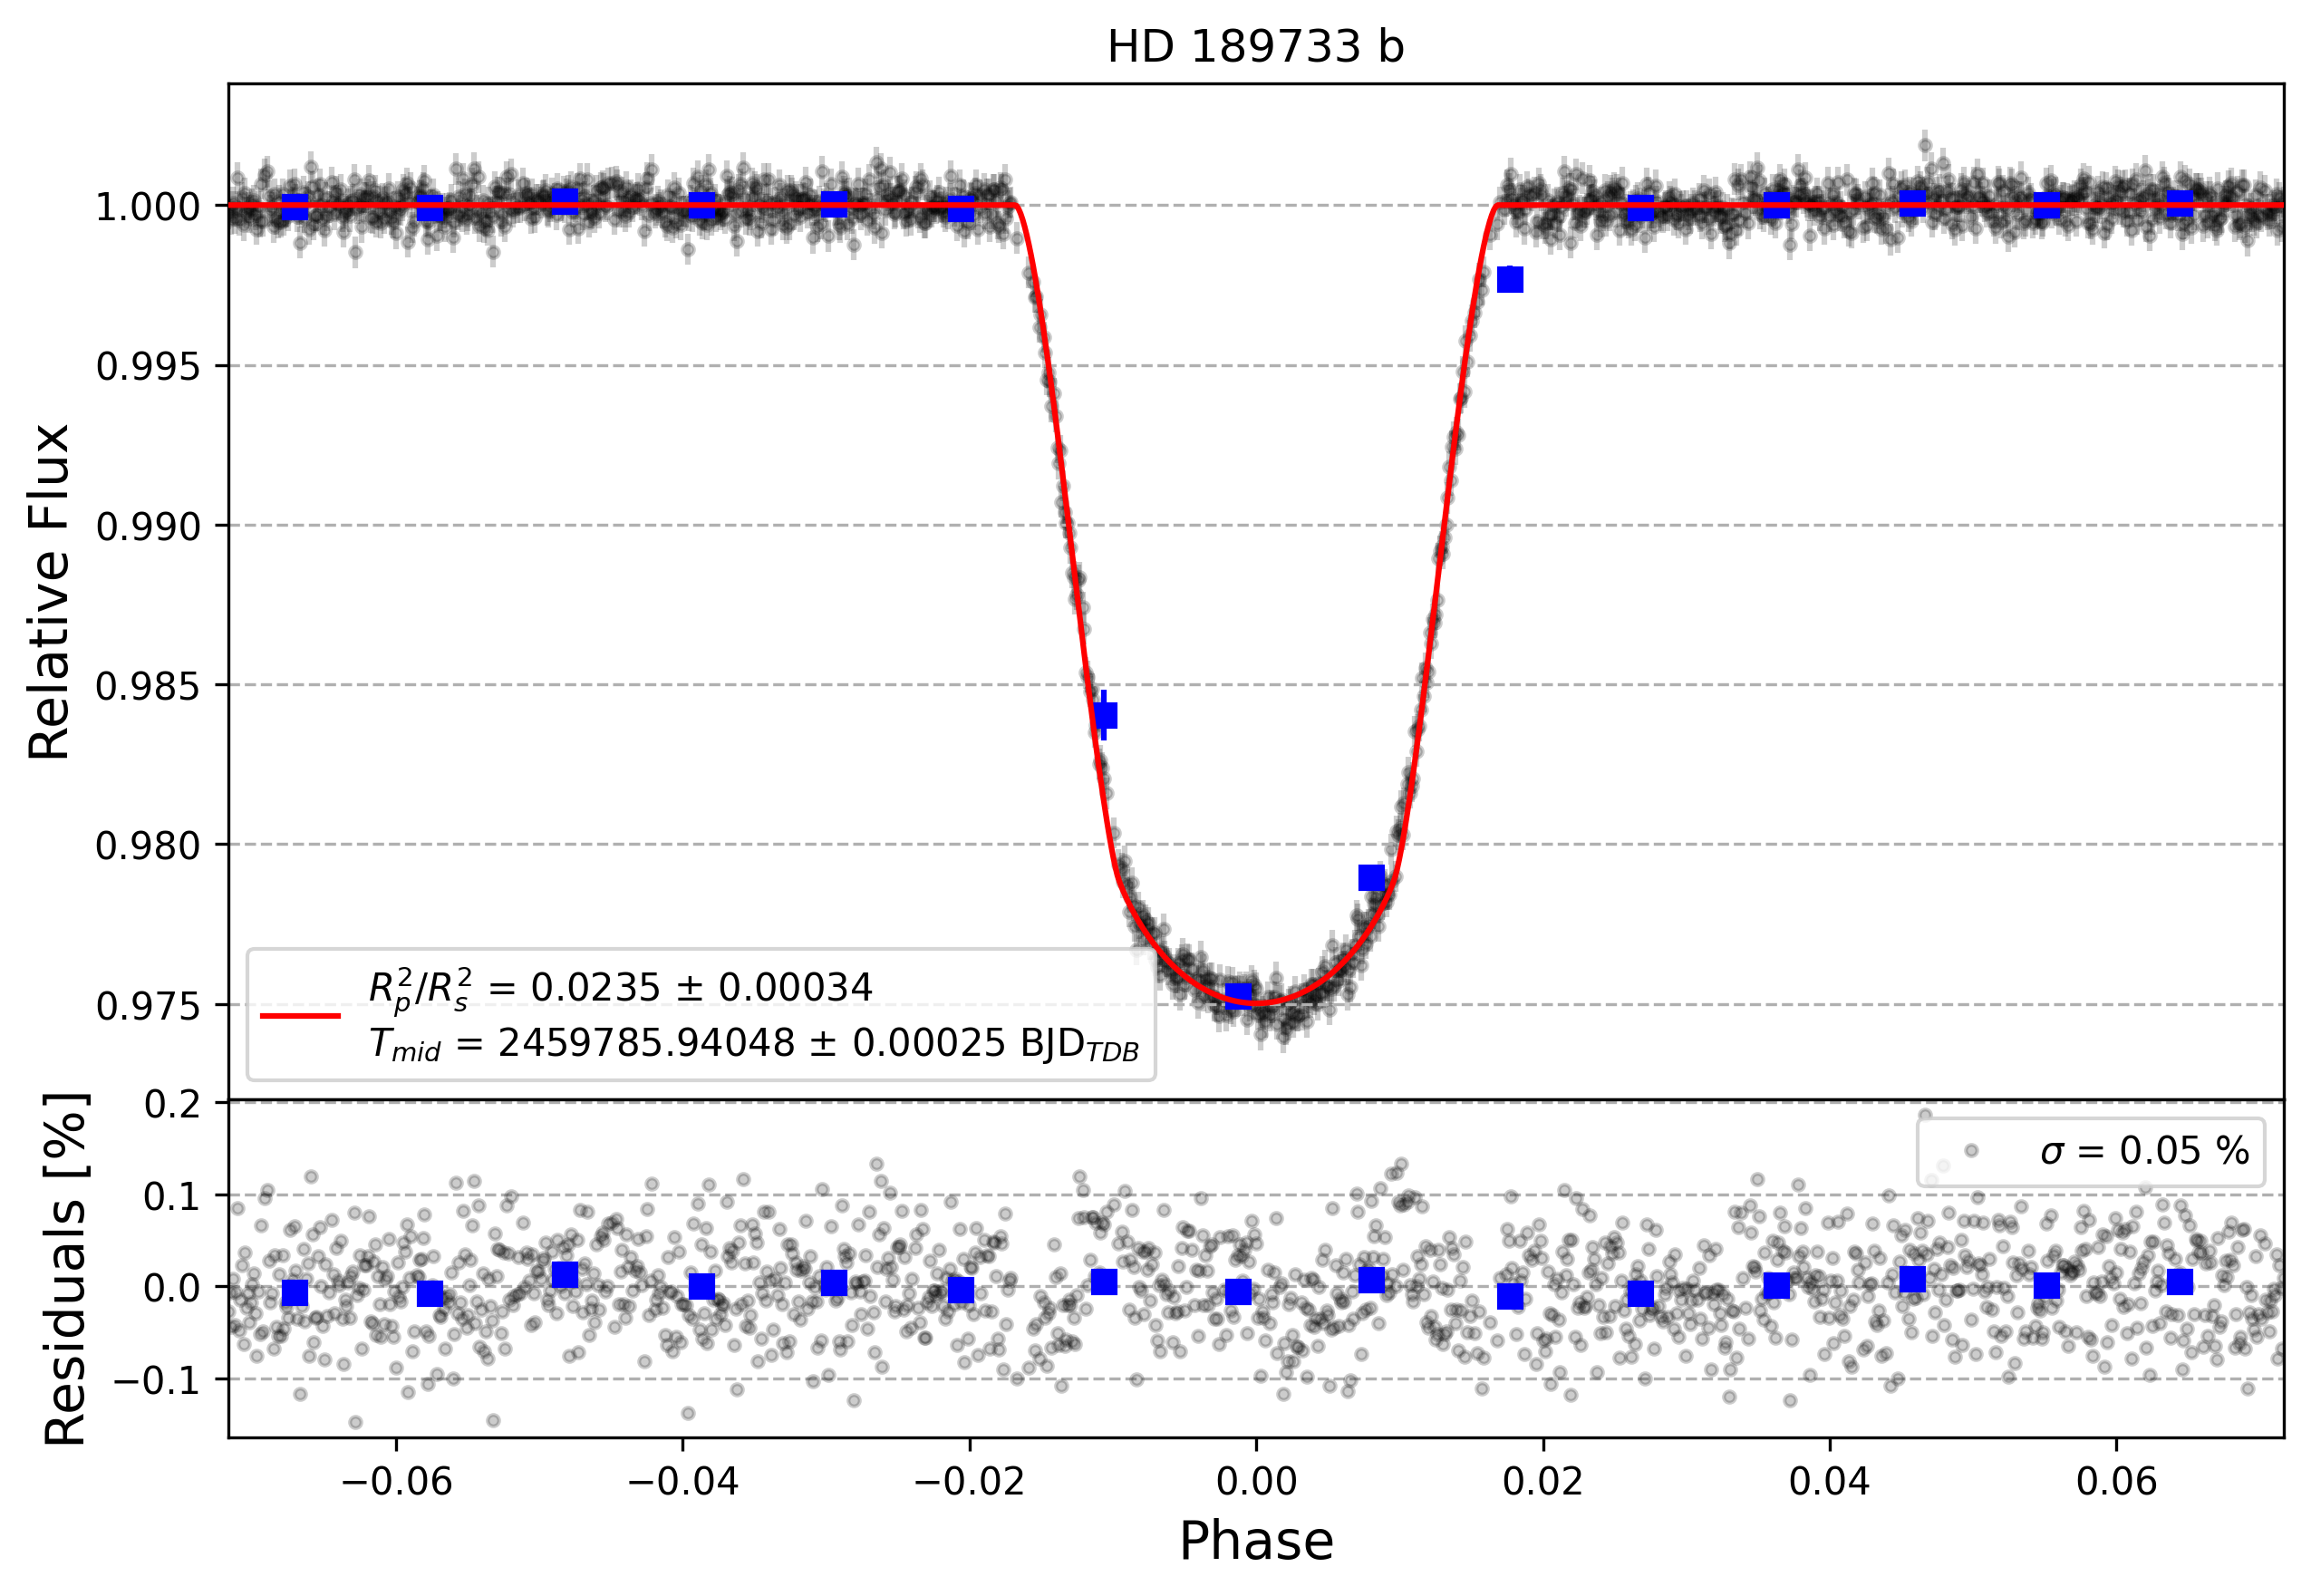 Light curve chart for 0d6aef29b8c405c16bdb0695ee1341ce